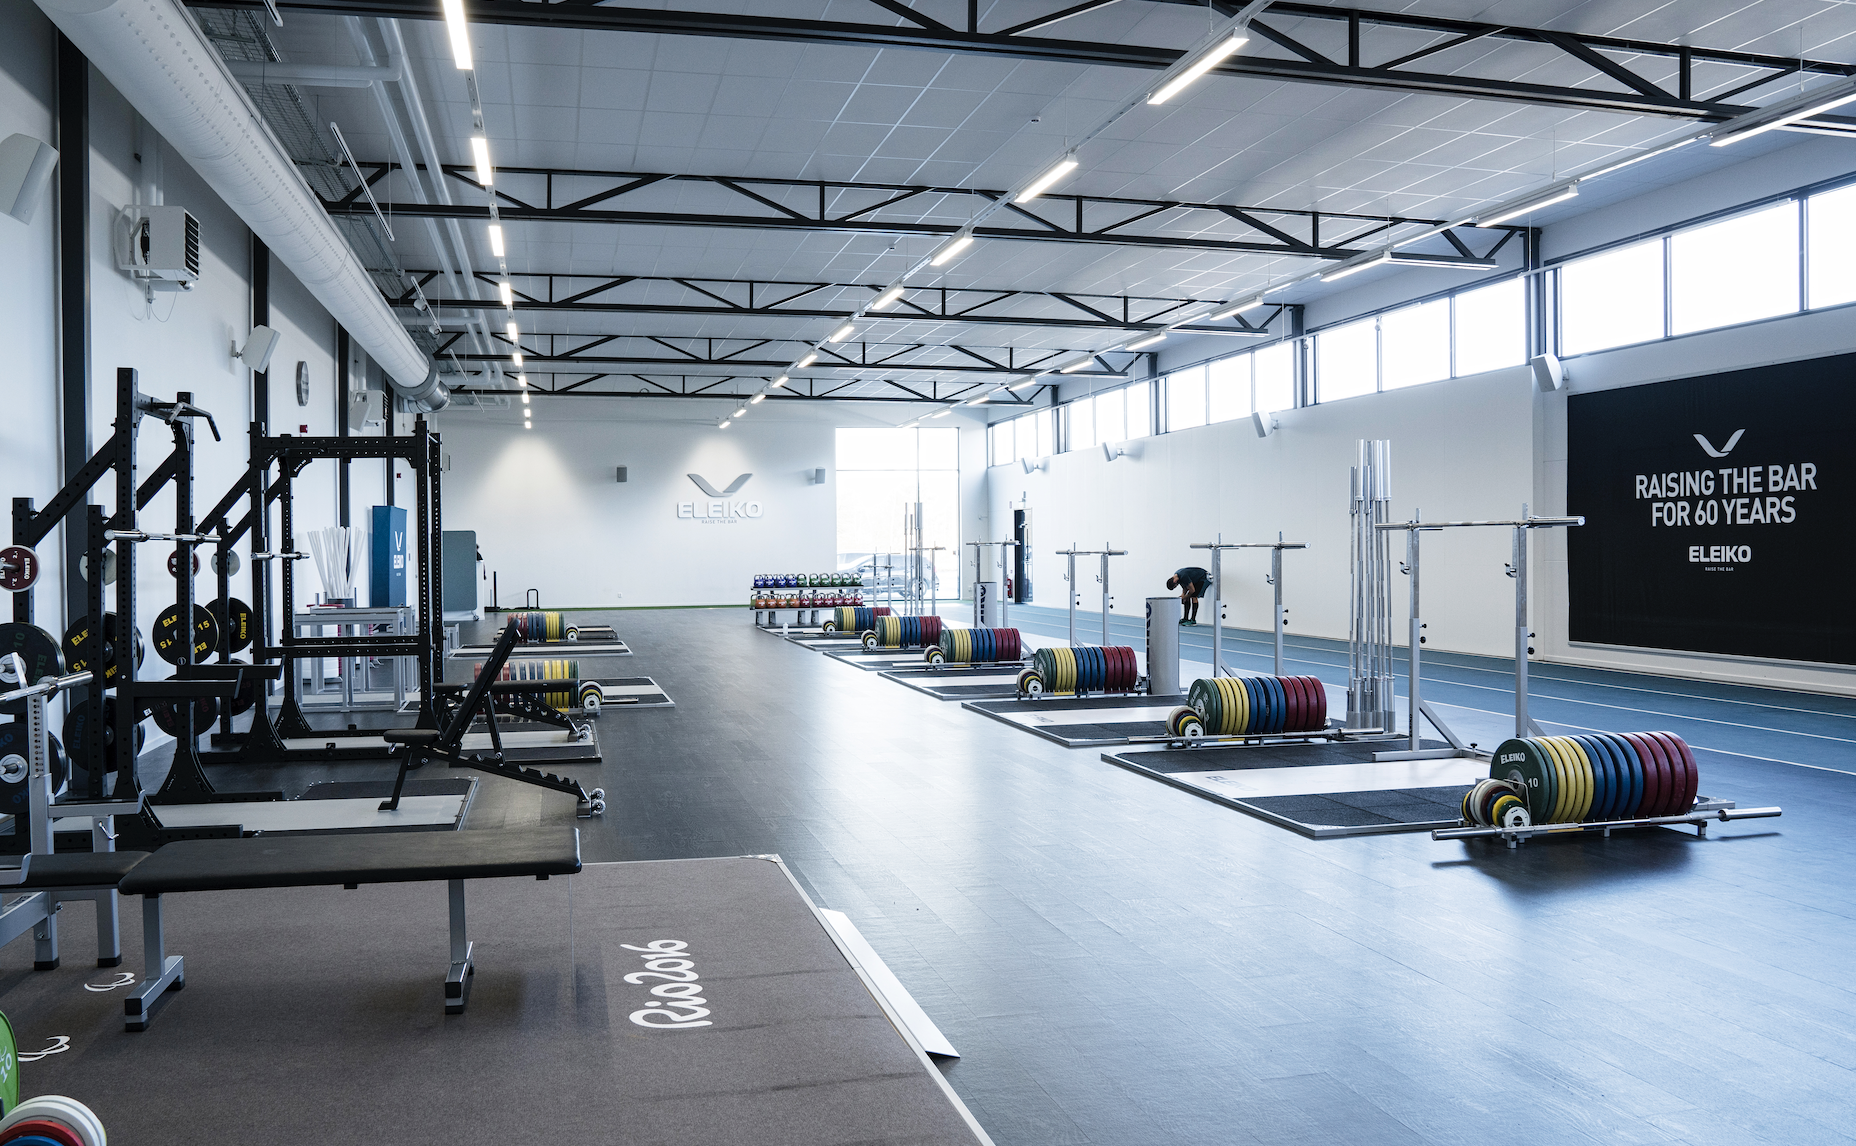 Weightlifting's refugee team could be hosted at the Eleiko headquarters ©ITG